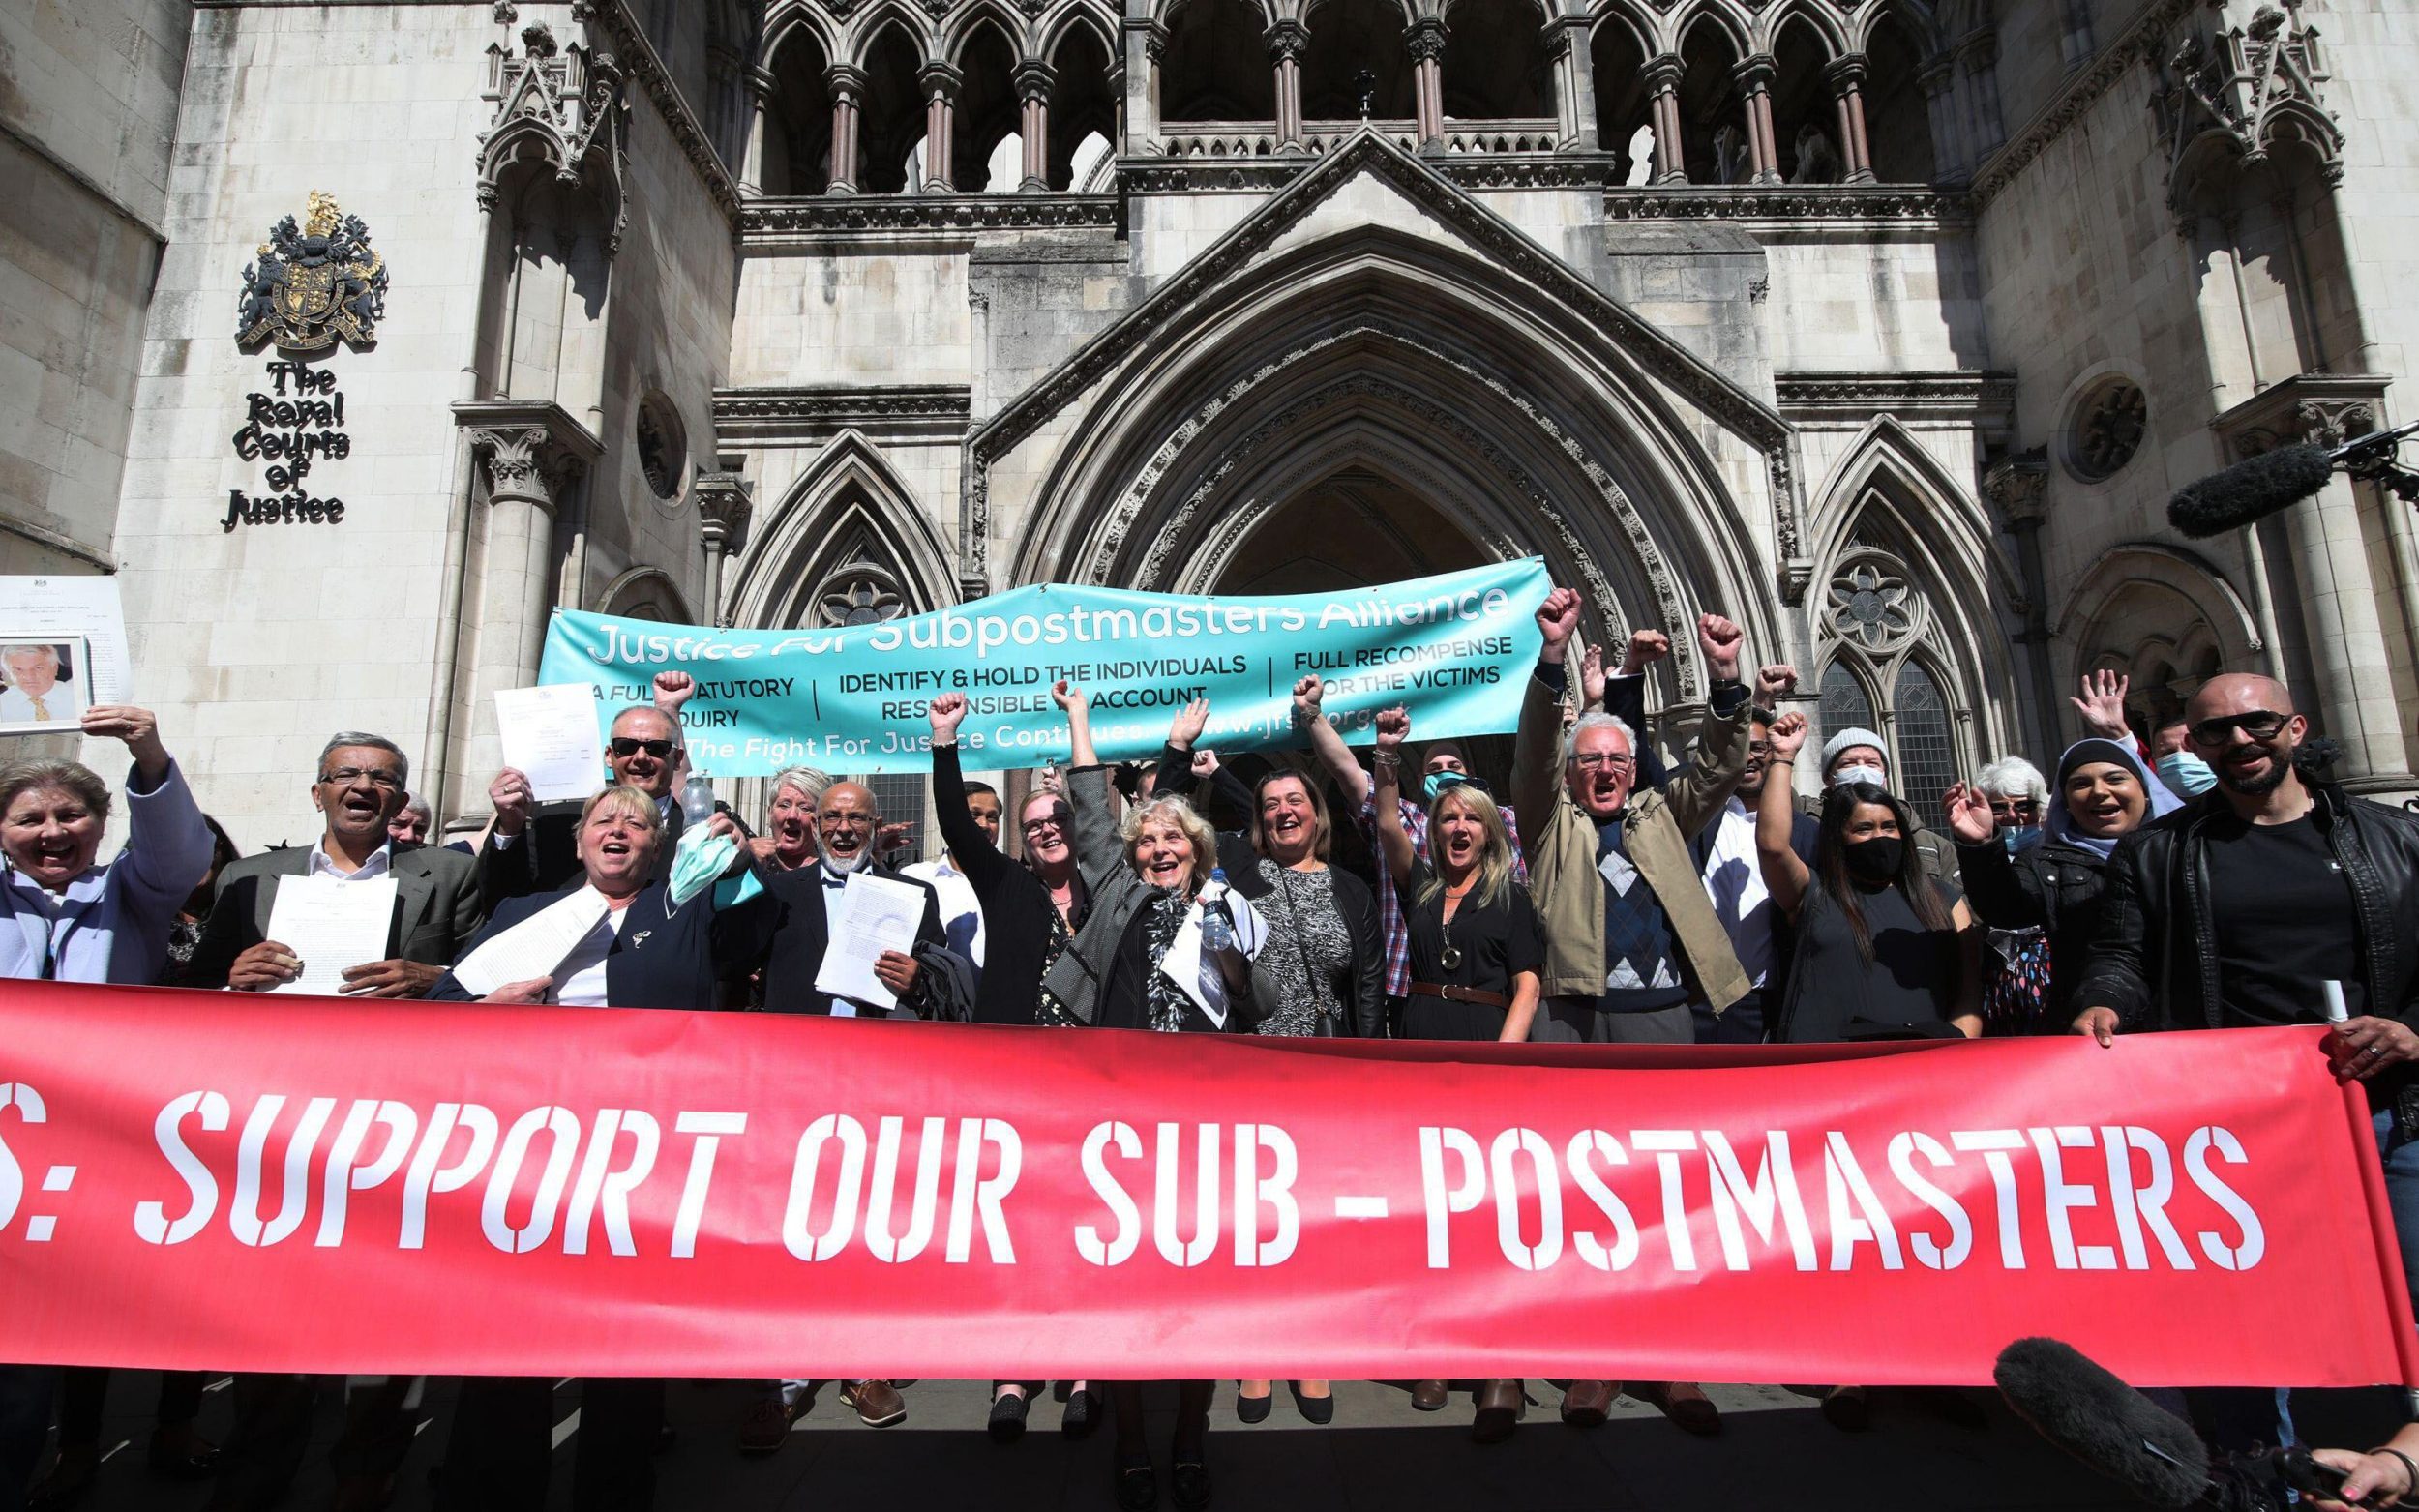 post office plotted to raid sub-postmasters’ pensions, inquiry hears